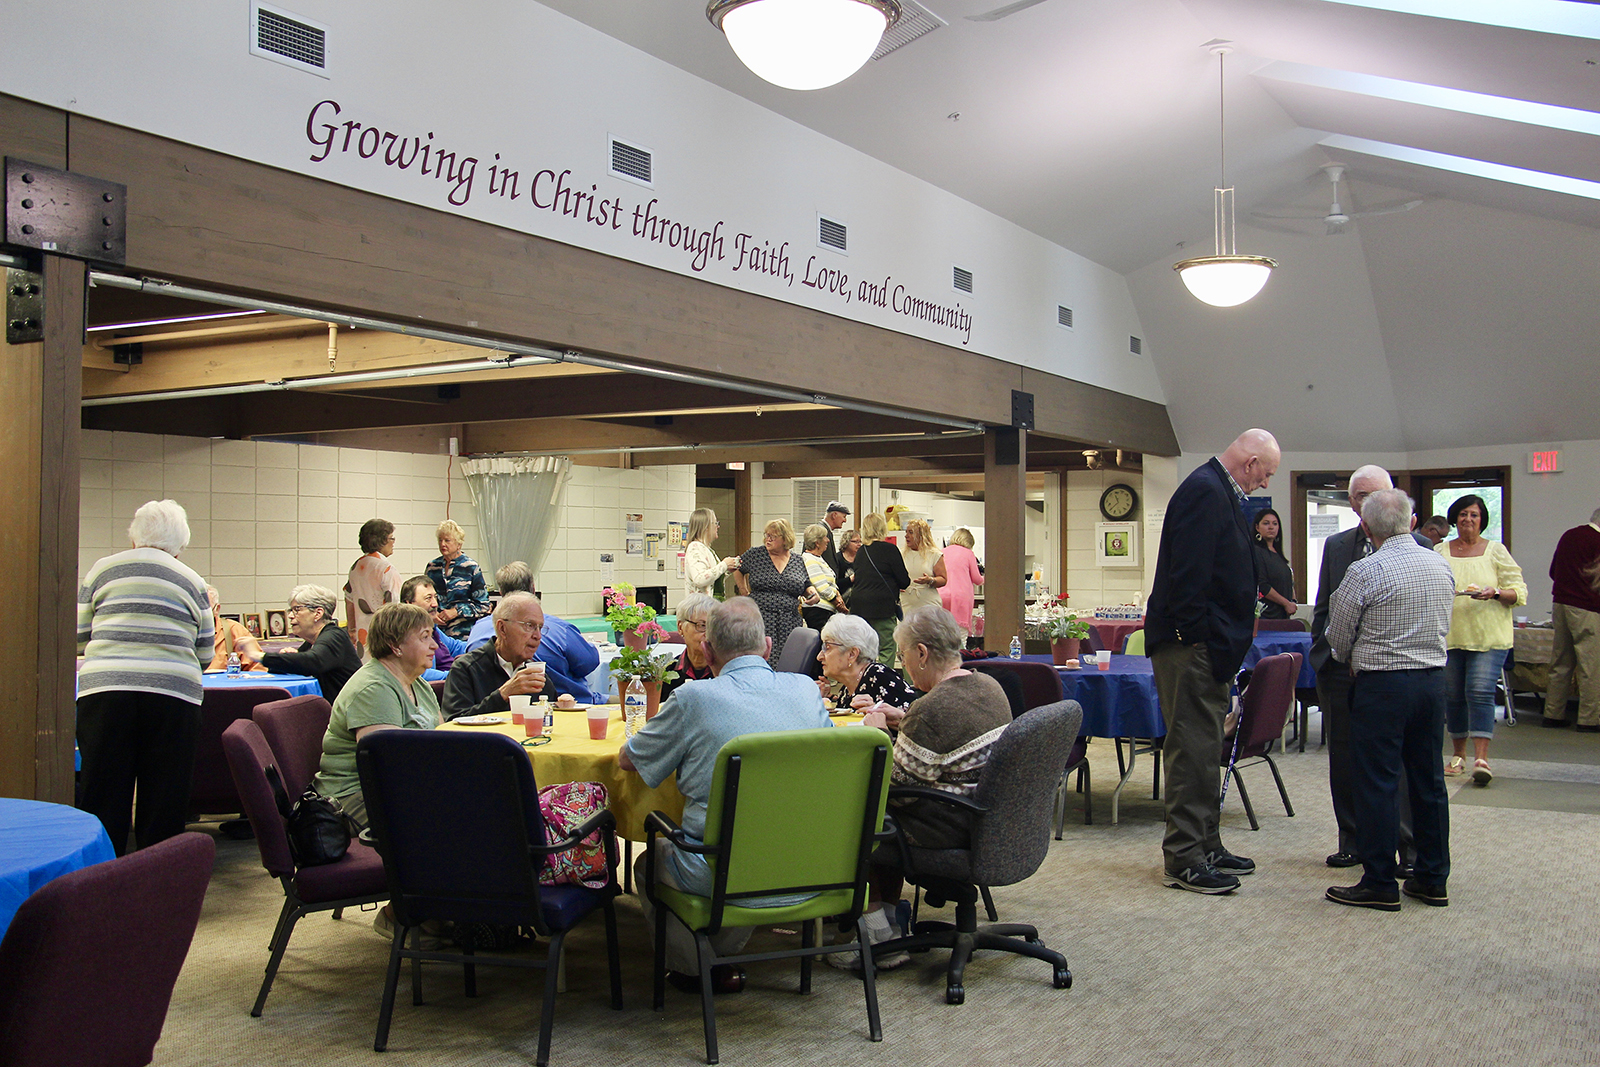 People celebrate two members' 60th wedding anniversary in the fellowship hall, Sunday, June 11, 2023, after a service at Christ United Methodist Church in Greenfield, Wisconsin. RNS photo by Emily McFarlan Miller